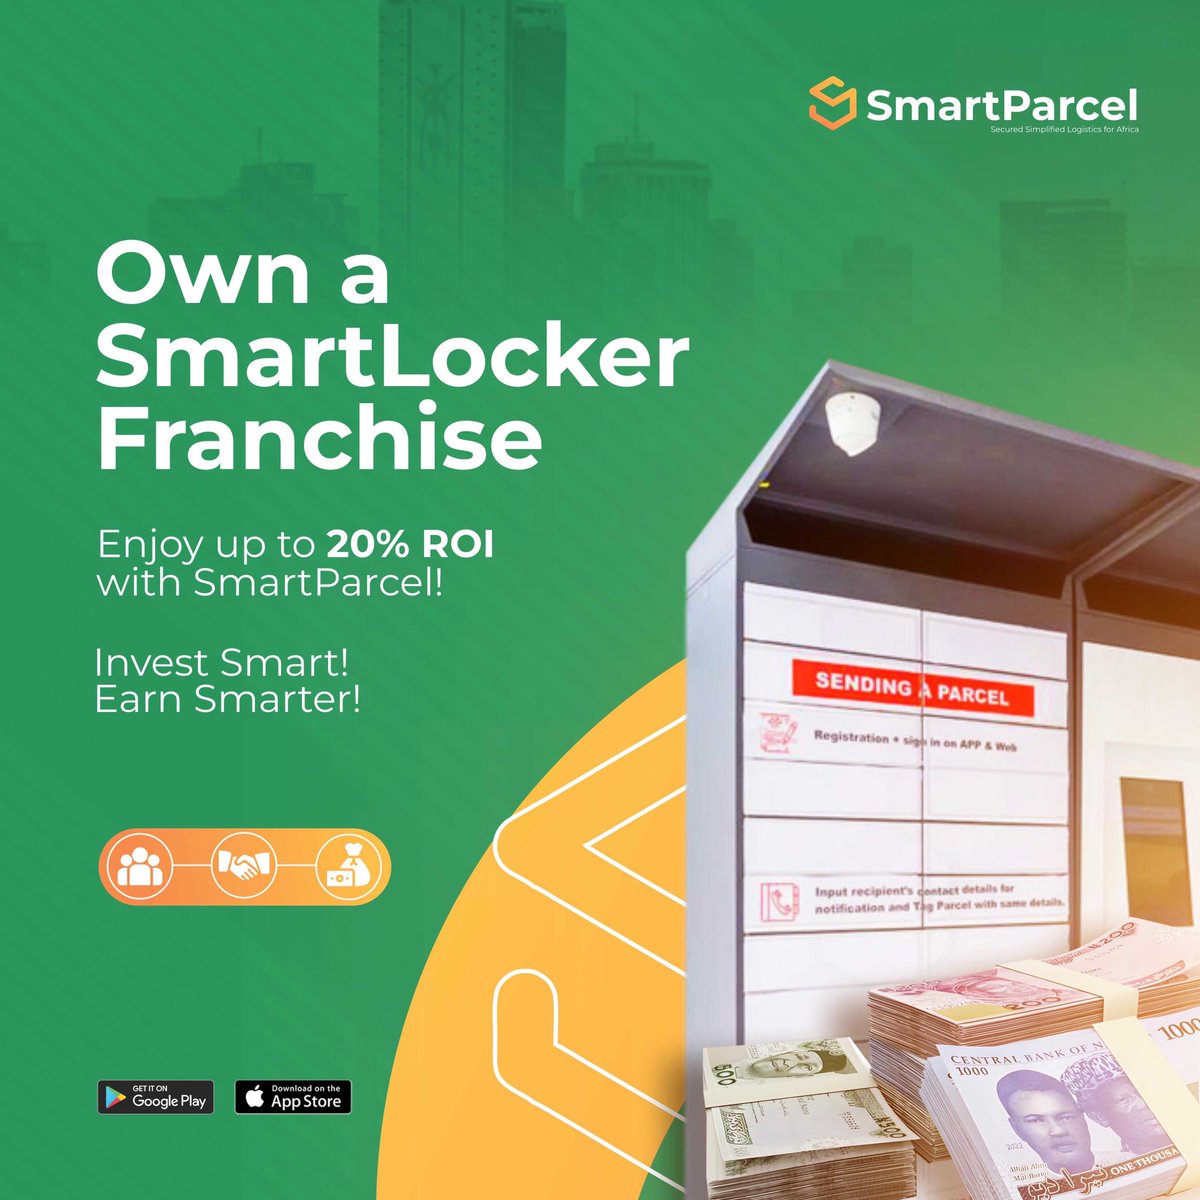 Unlock your full potential with our SmartLocker Franchise!

You stand a chance to enjoy up to 20% ROI with SmartParcel! 
Invest Smart ! Earn Smarter!

#SmartLocker #FranchiseOpportunity #Investment #SmartParcel